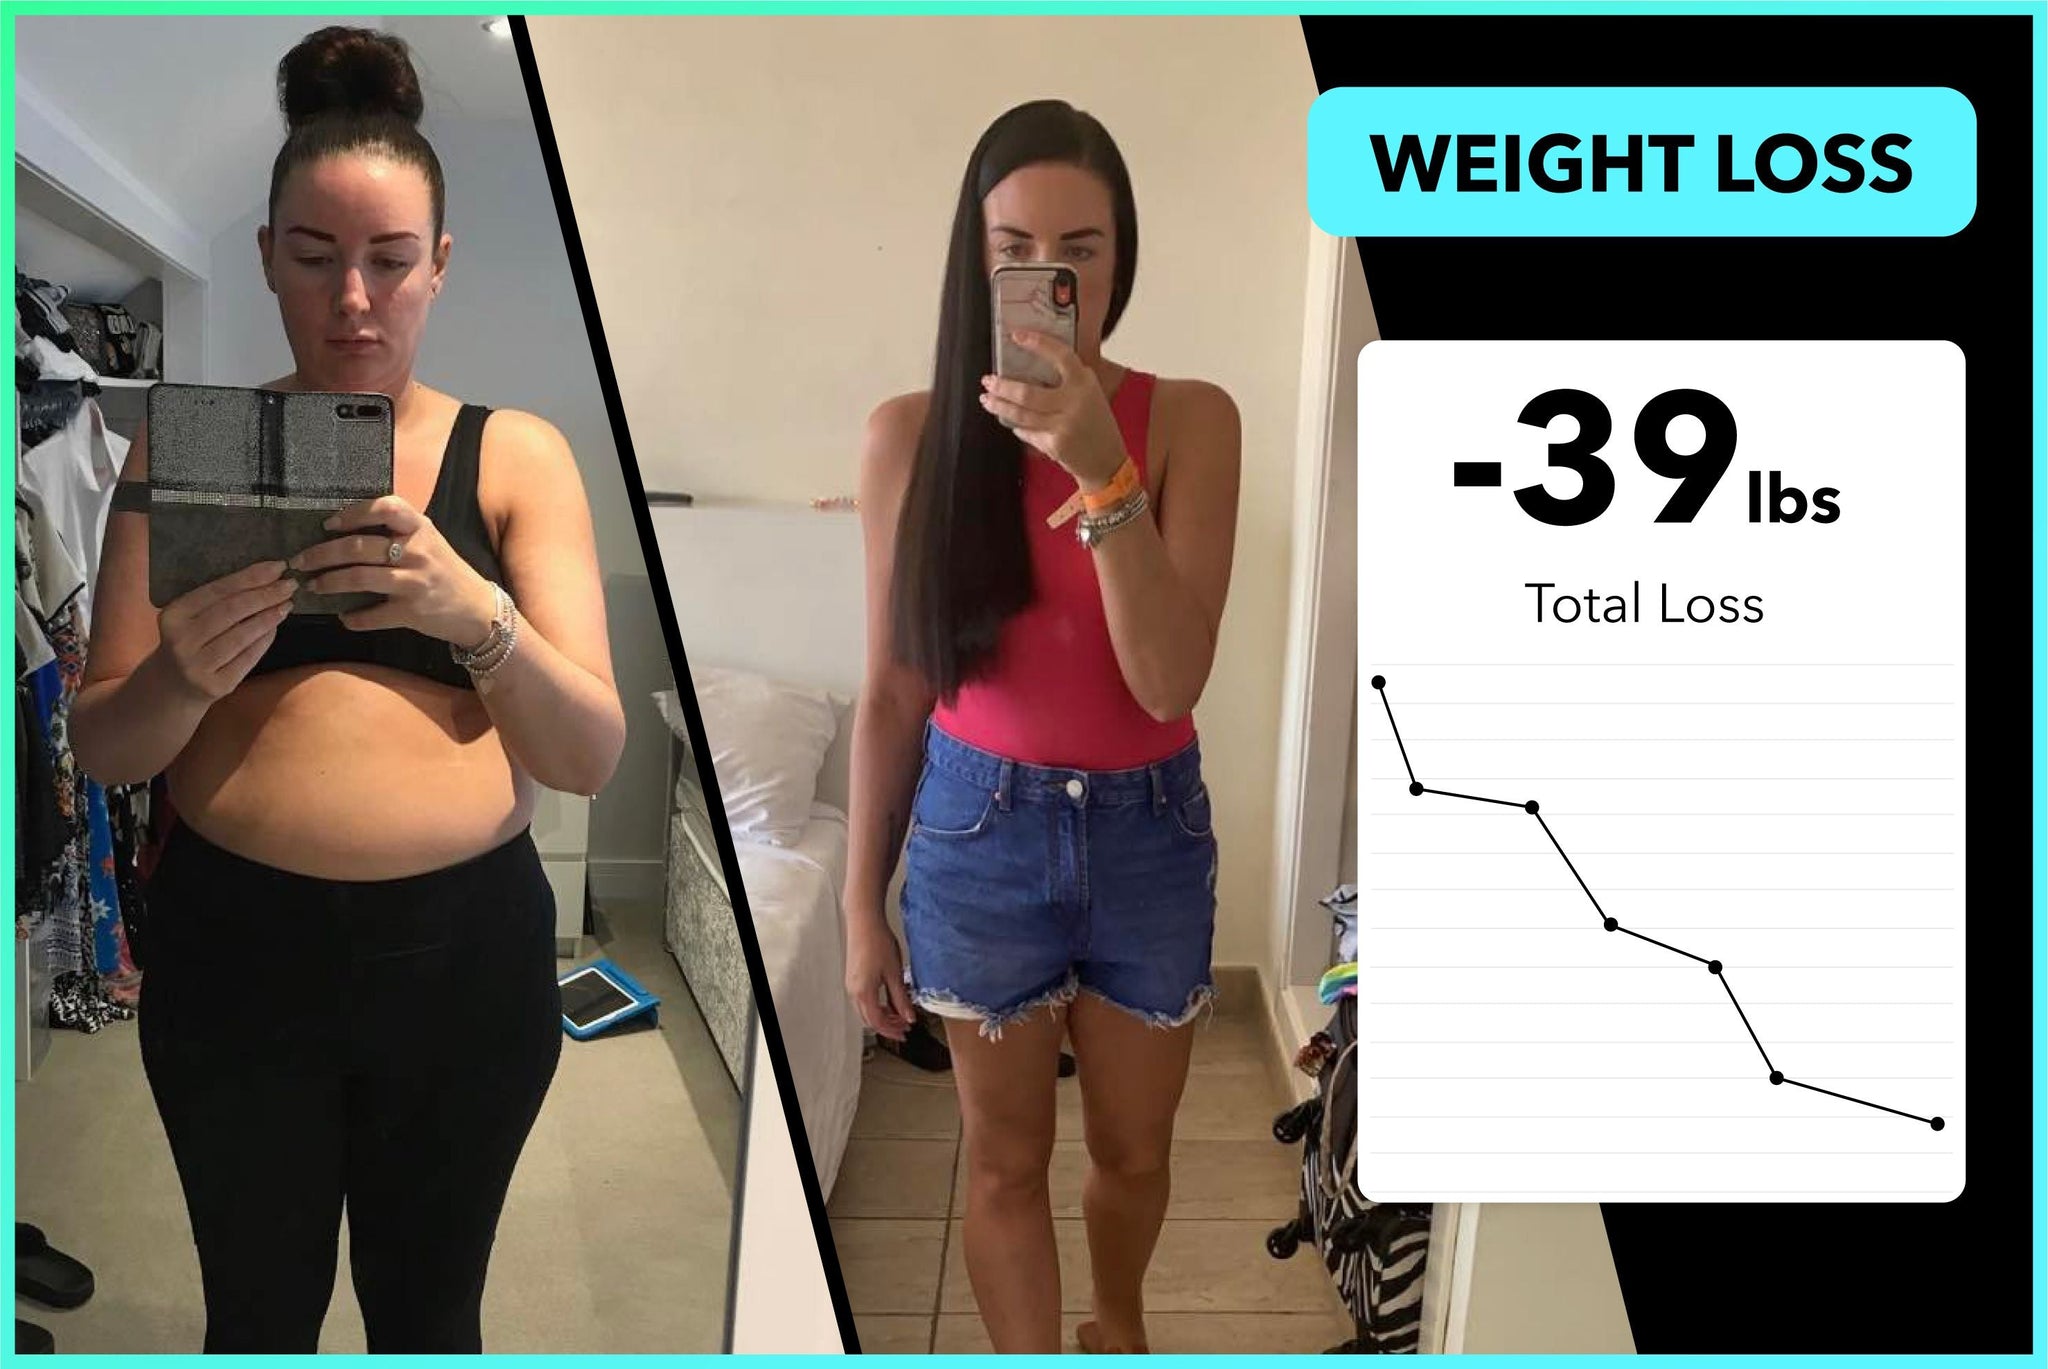 Jade has lost 39lbs with Team RH, here's how she did it